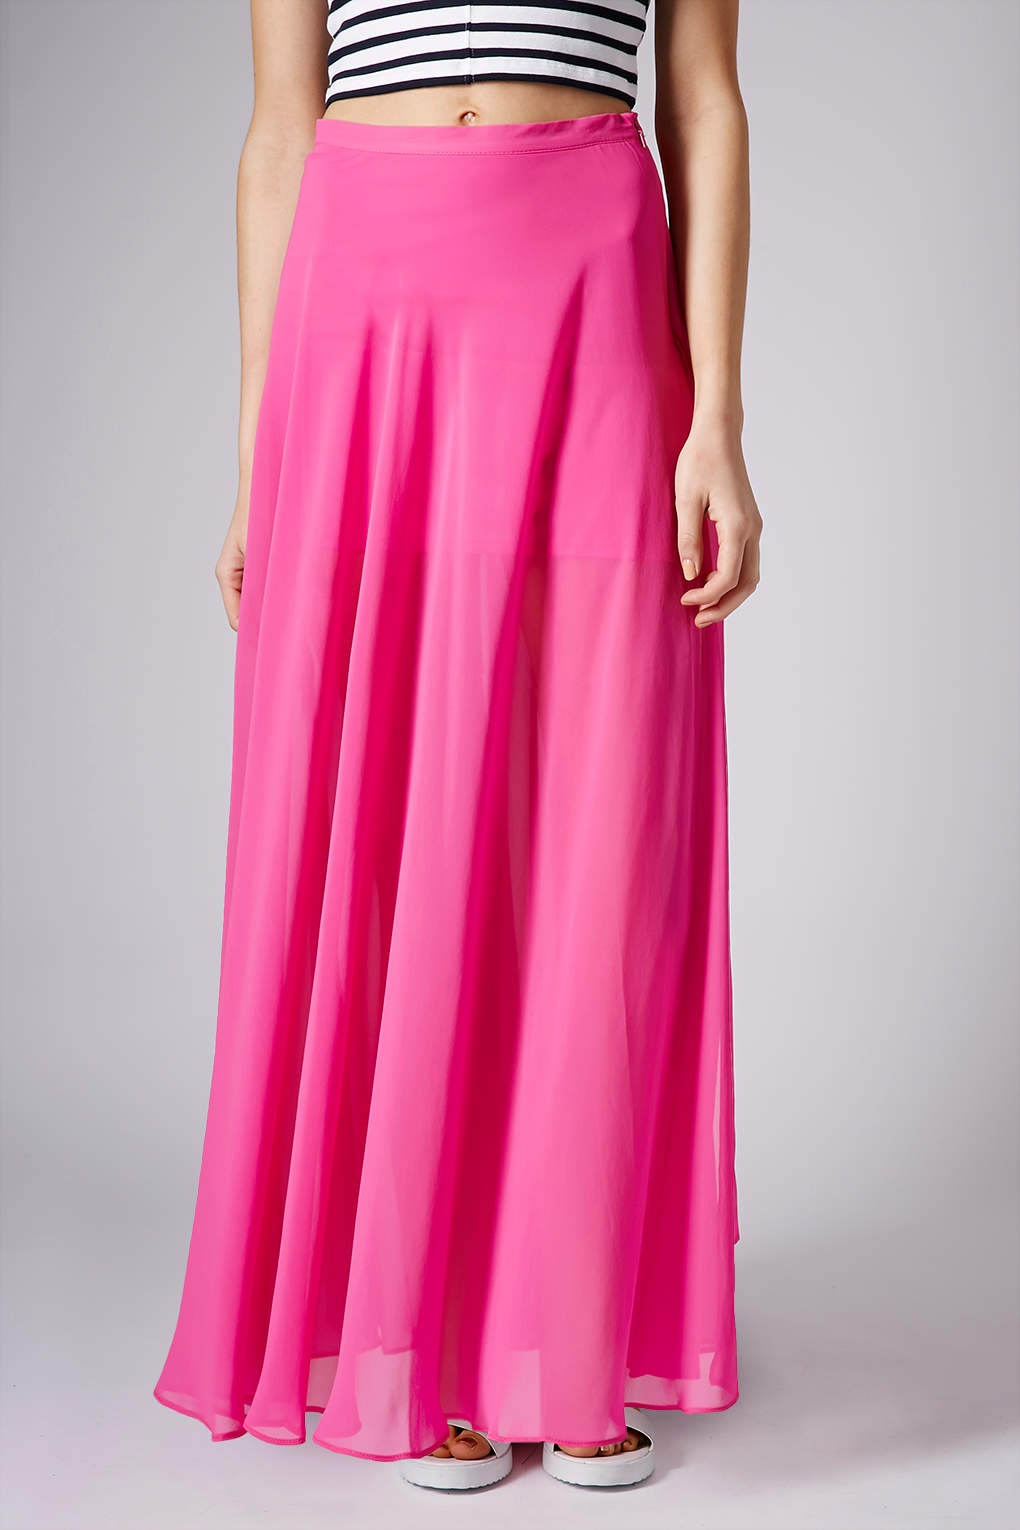 Topshop Pink Chiffon Maxi Skirt In Pink Lyst 1723